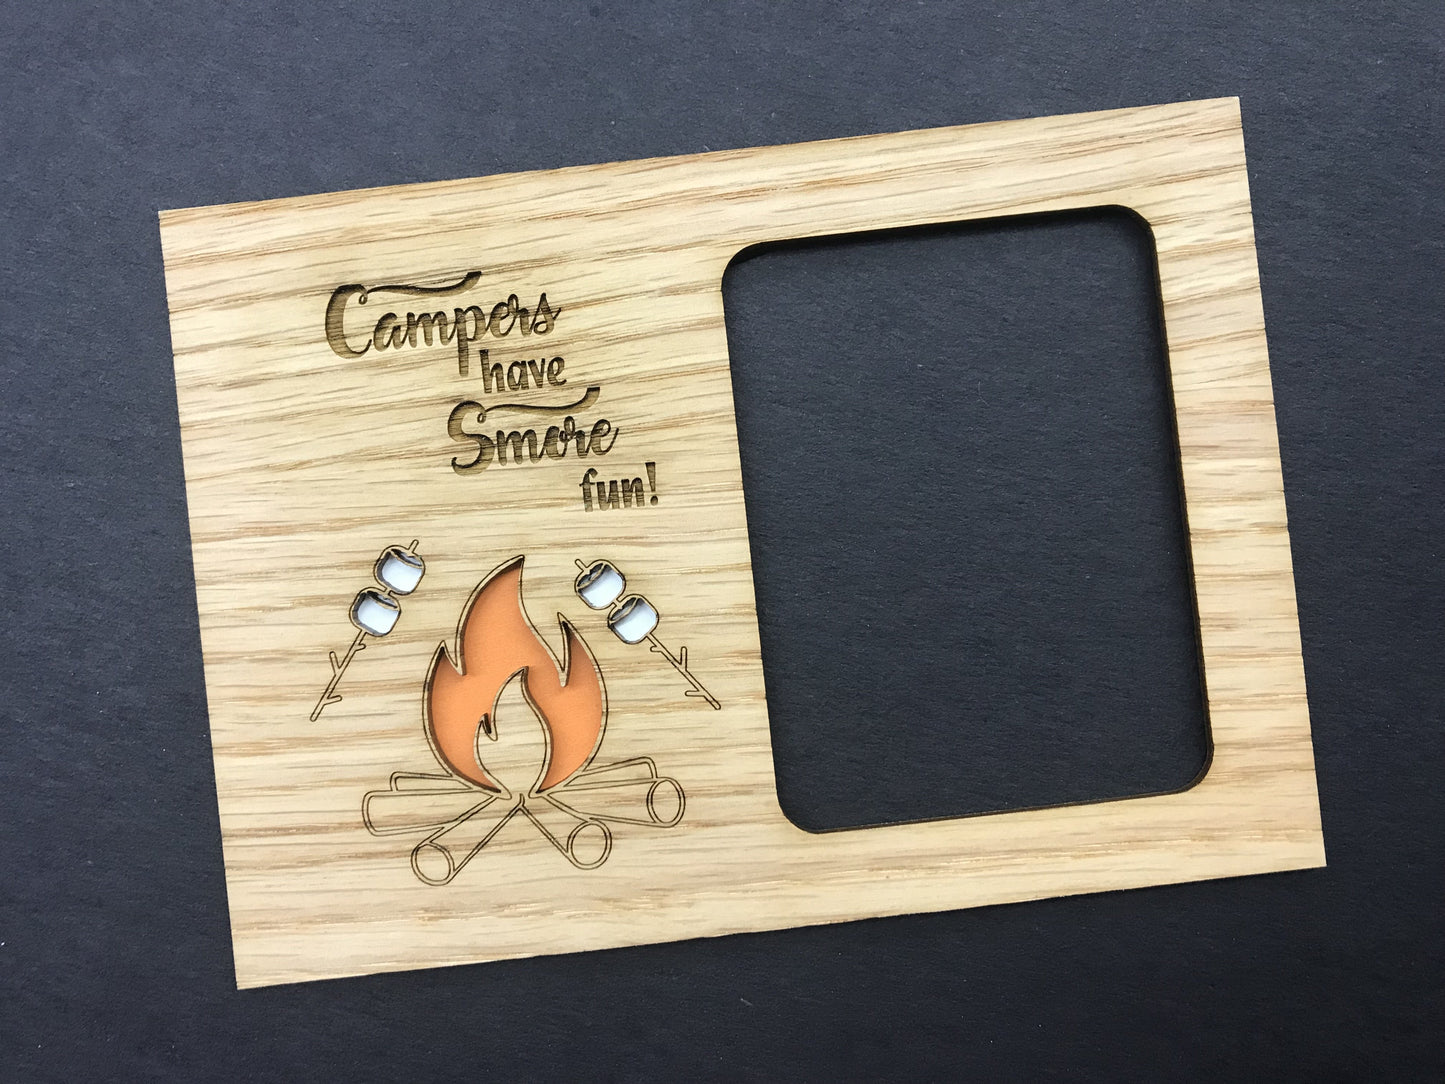 Campers Have Smore Fun Picture Frame - 5x7 Frame Holds 3x4 Photo